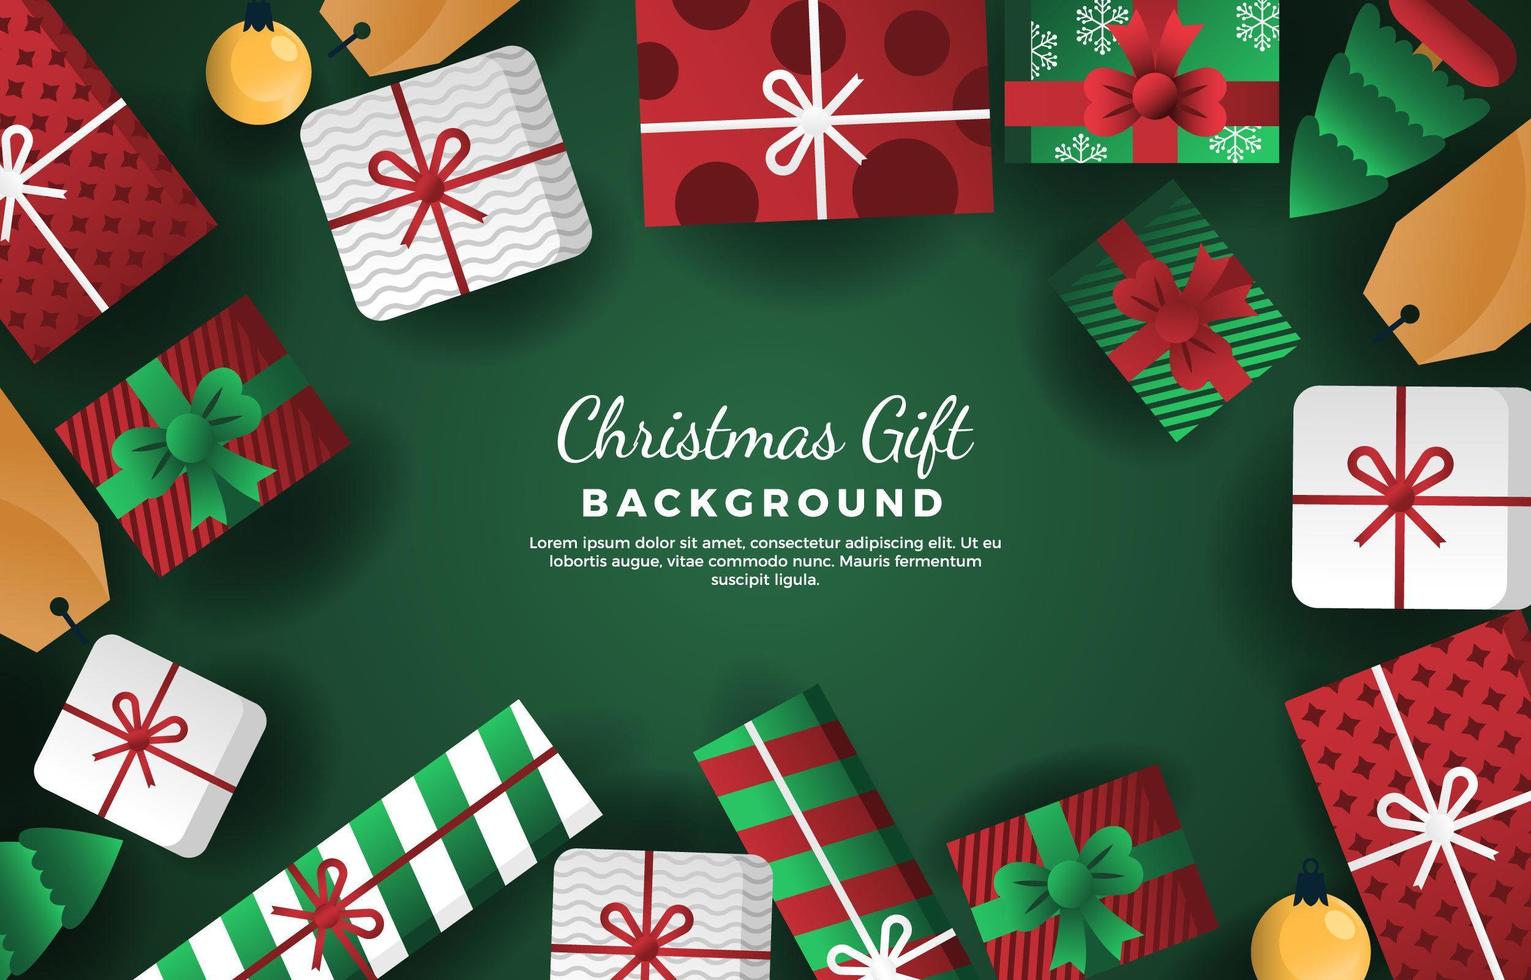 Background of Christmas Gift Boxes vector